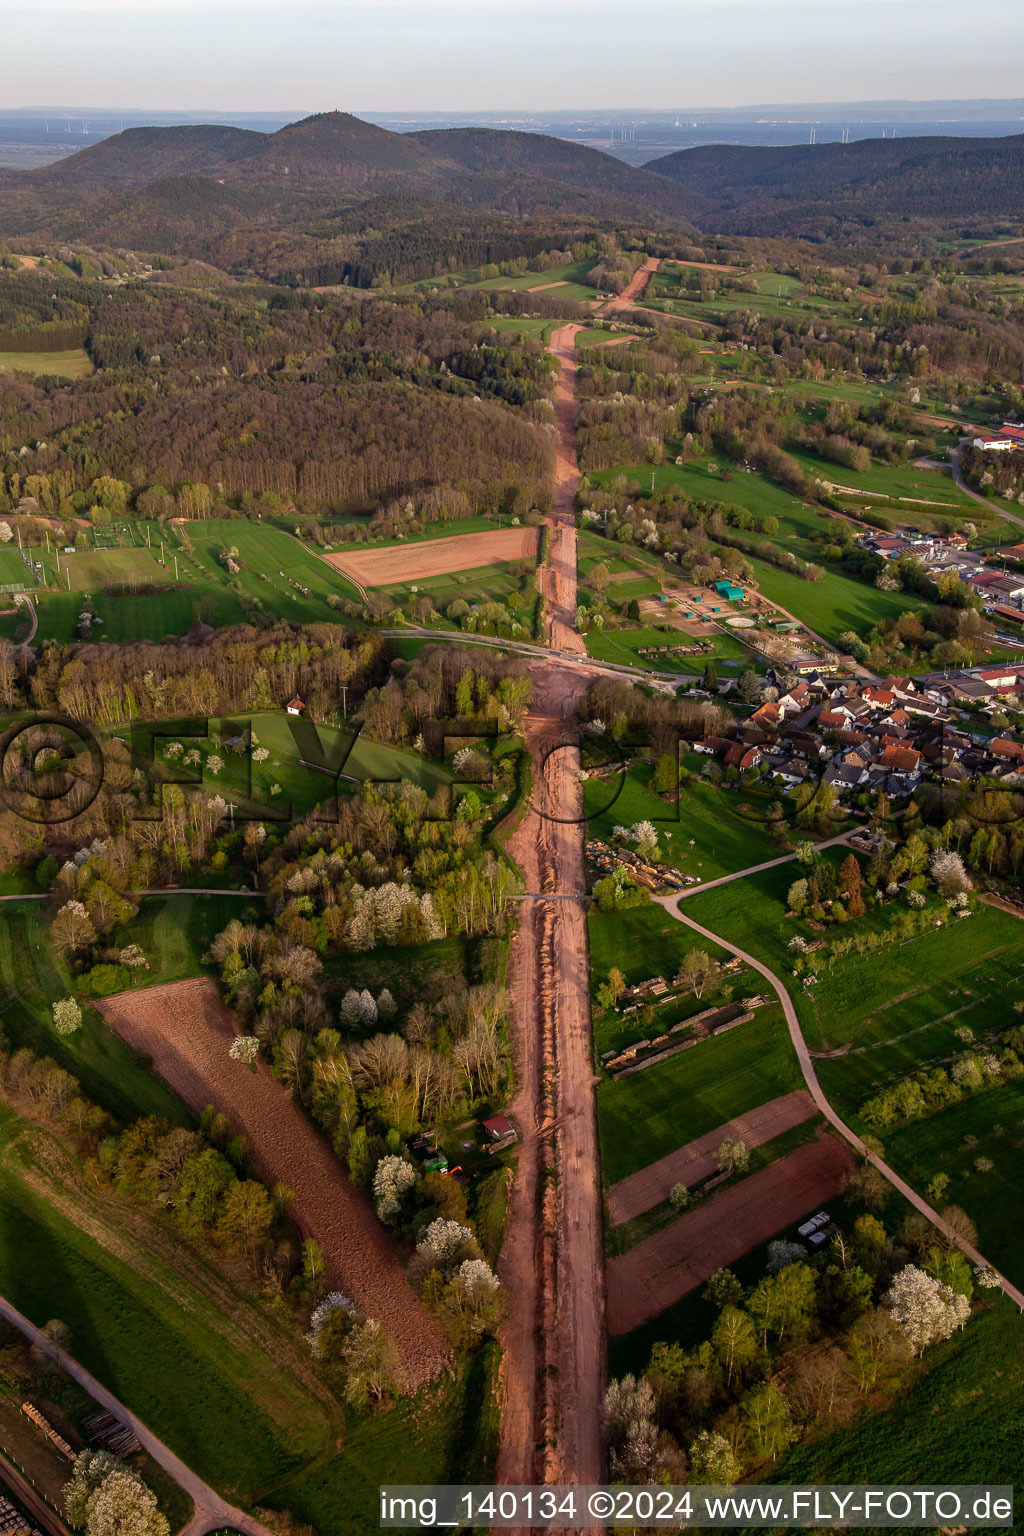 Oblique view of Path through the Palatinate Forest to rebuild the 51 km section of the Trans-Europe Natural Gas Pipeline (TENP-III from the Netherlands to Switzerland) between Mittelbrunn and Klingenmünster in the district Gossersweiler in Gossersweiler-Stein in the state Rhineland-Palatinate, Germany